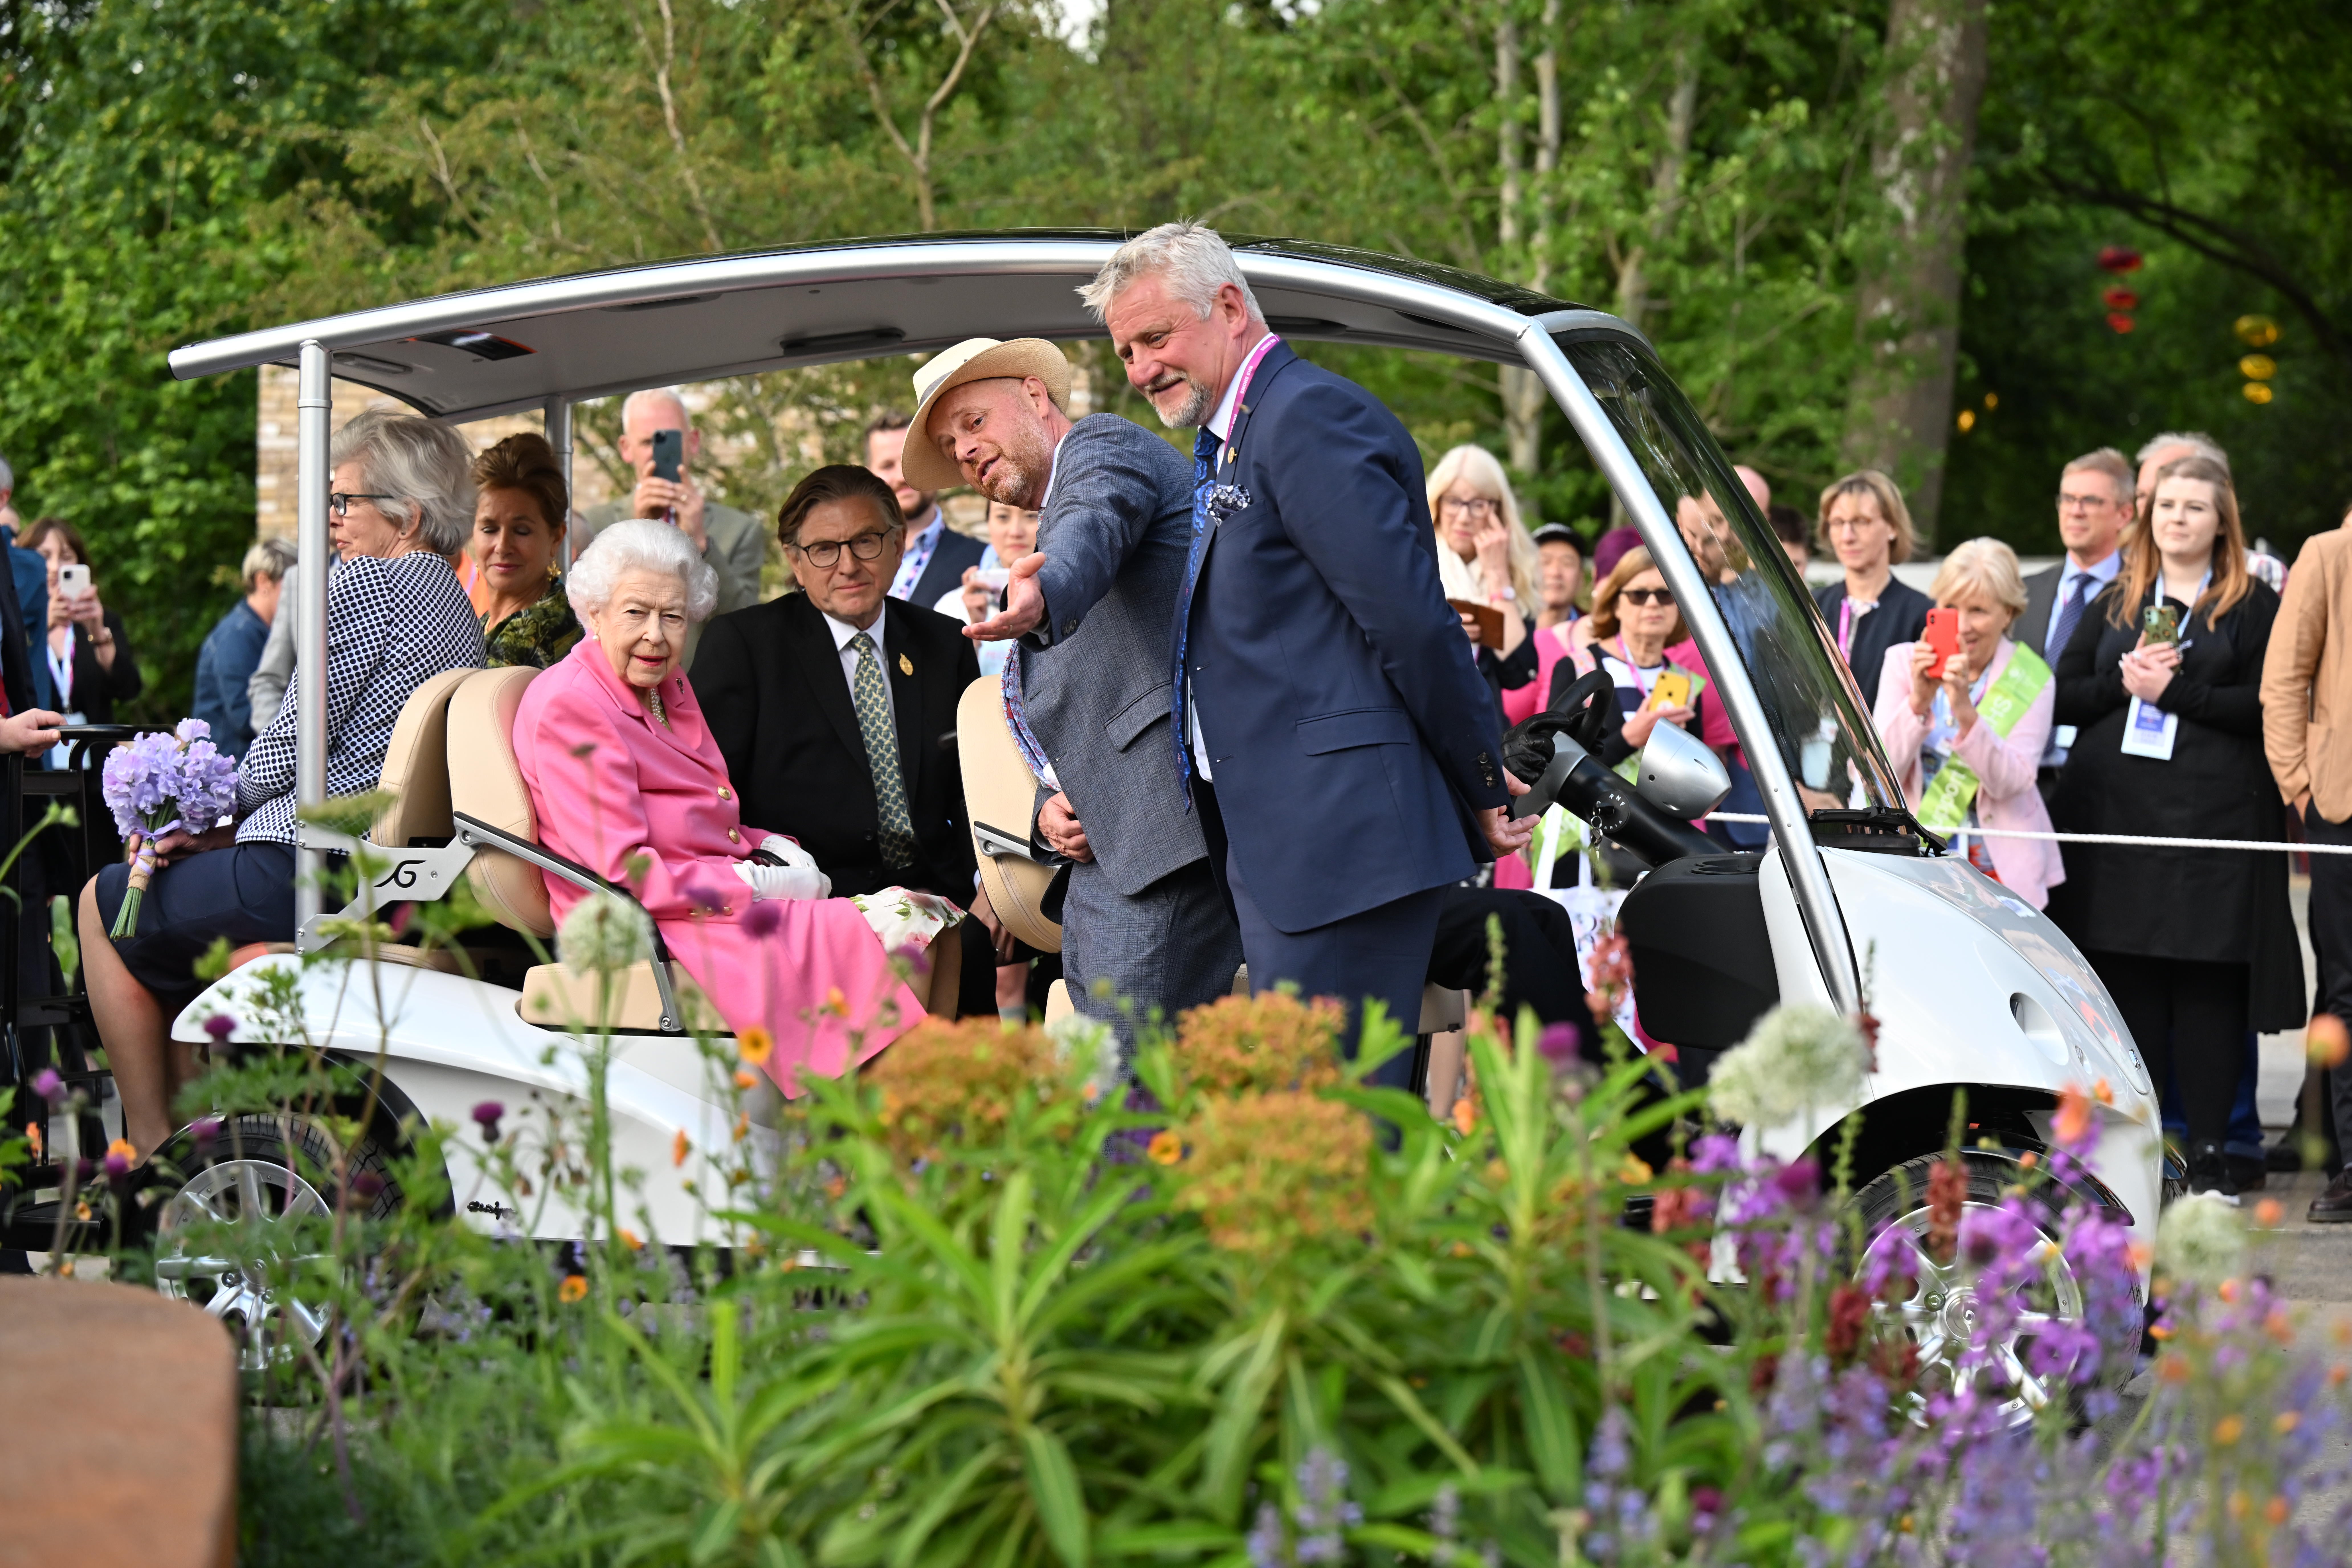 The Queen’s has attended the annual flower show more than 50 times